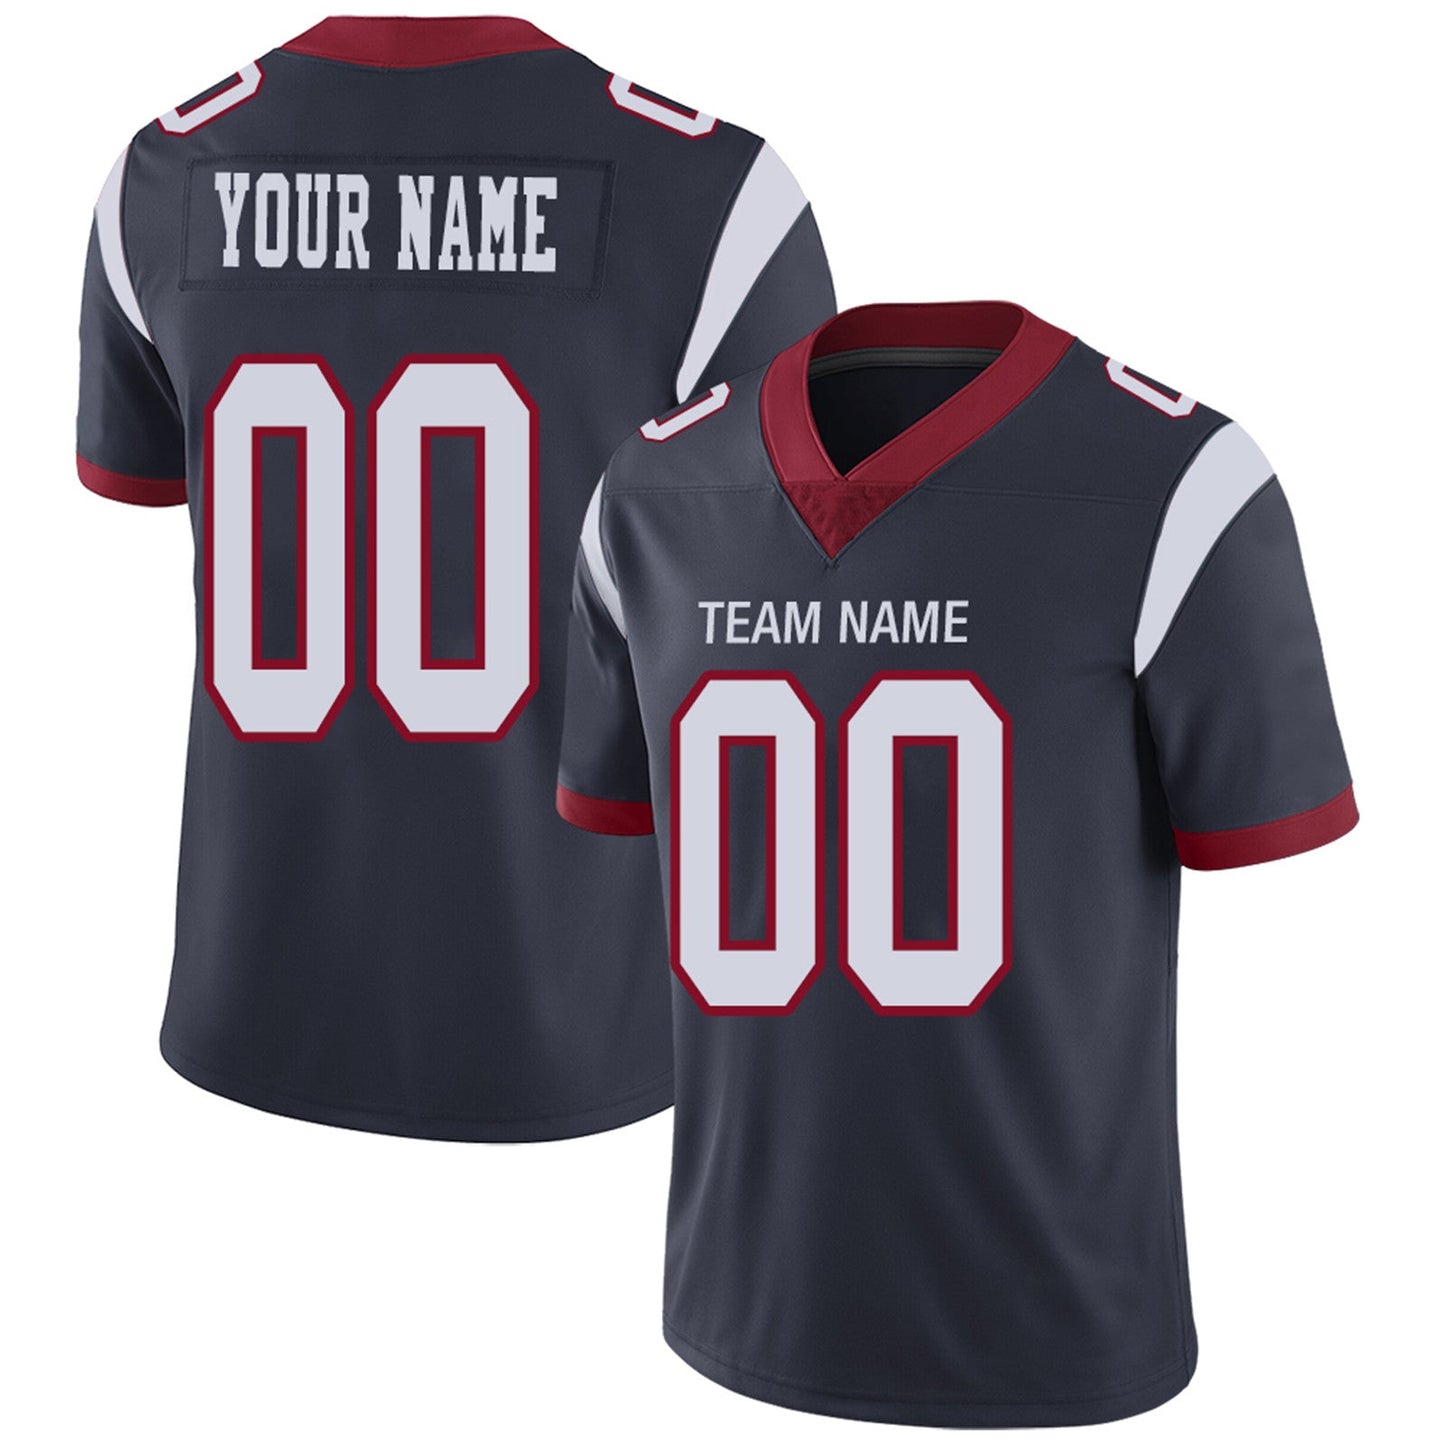 Custom H.Texans Football Jerseys Team Player or Personalized Design Your Own Name for Men's Women's Youth Jerseys Navy